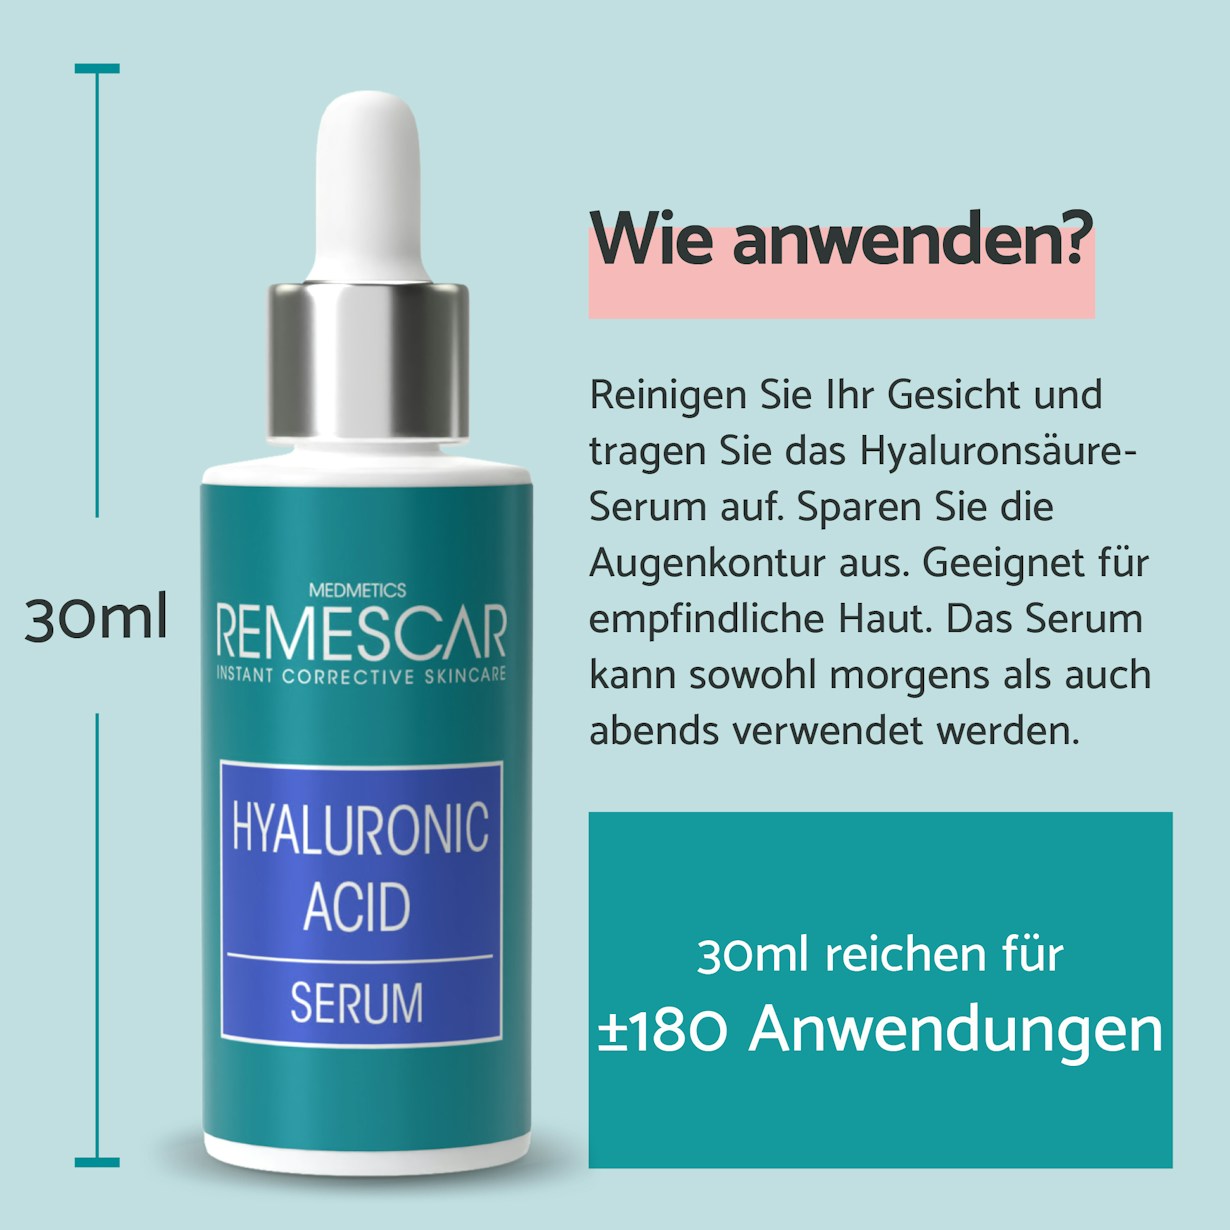 DE remescar pdp pictures website and amazon 2000x2000px hyaluronic acid3